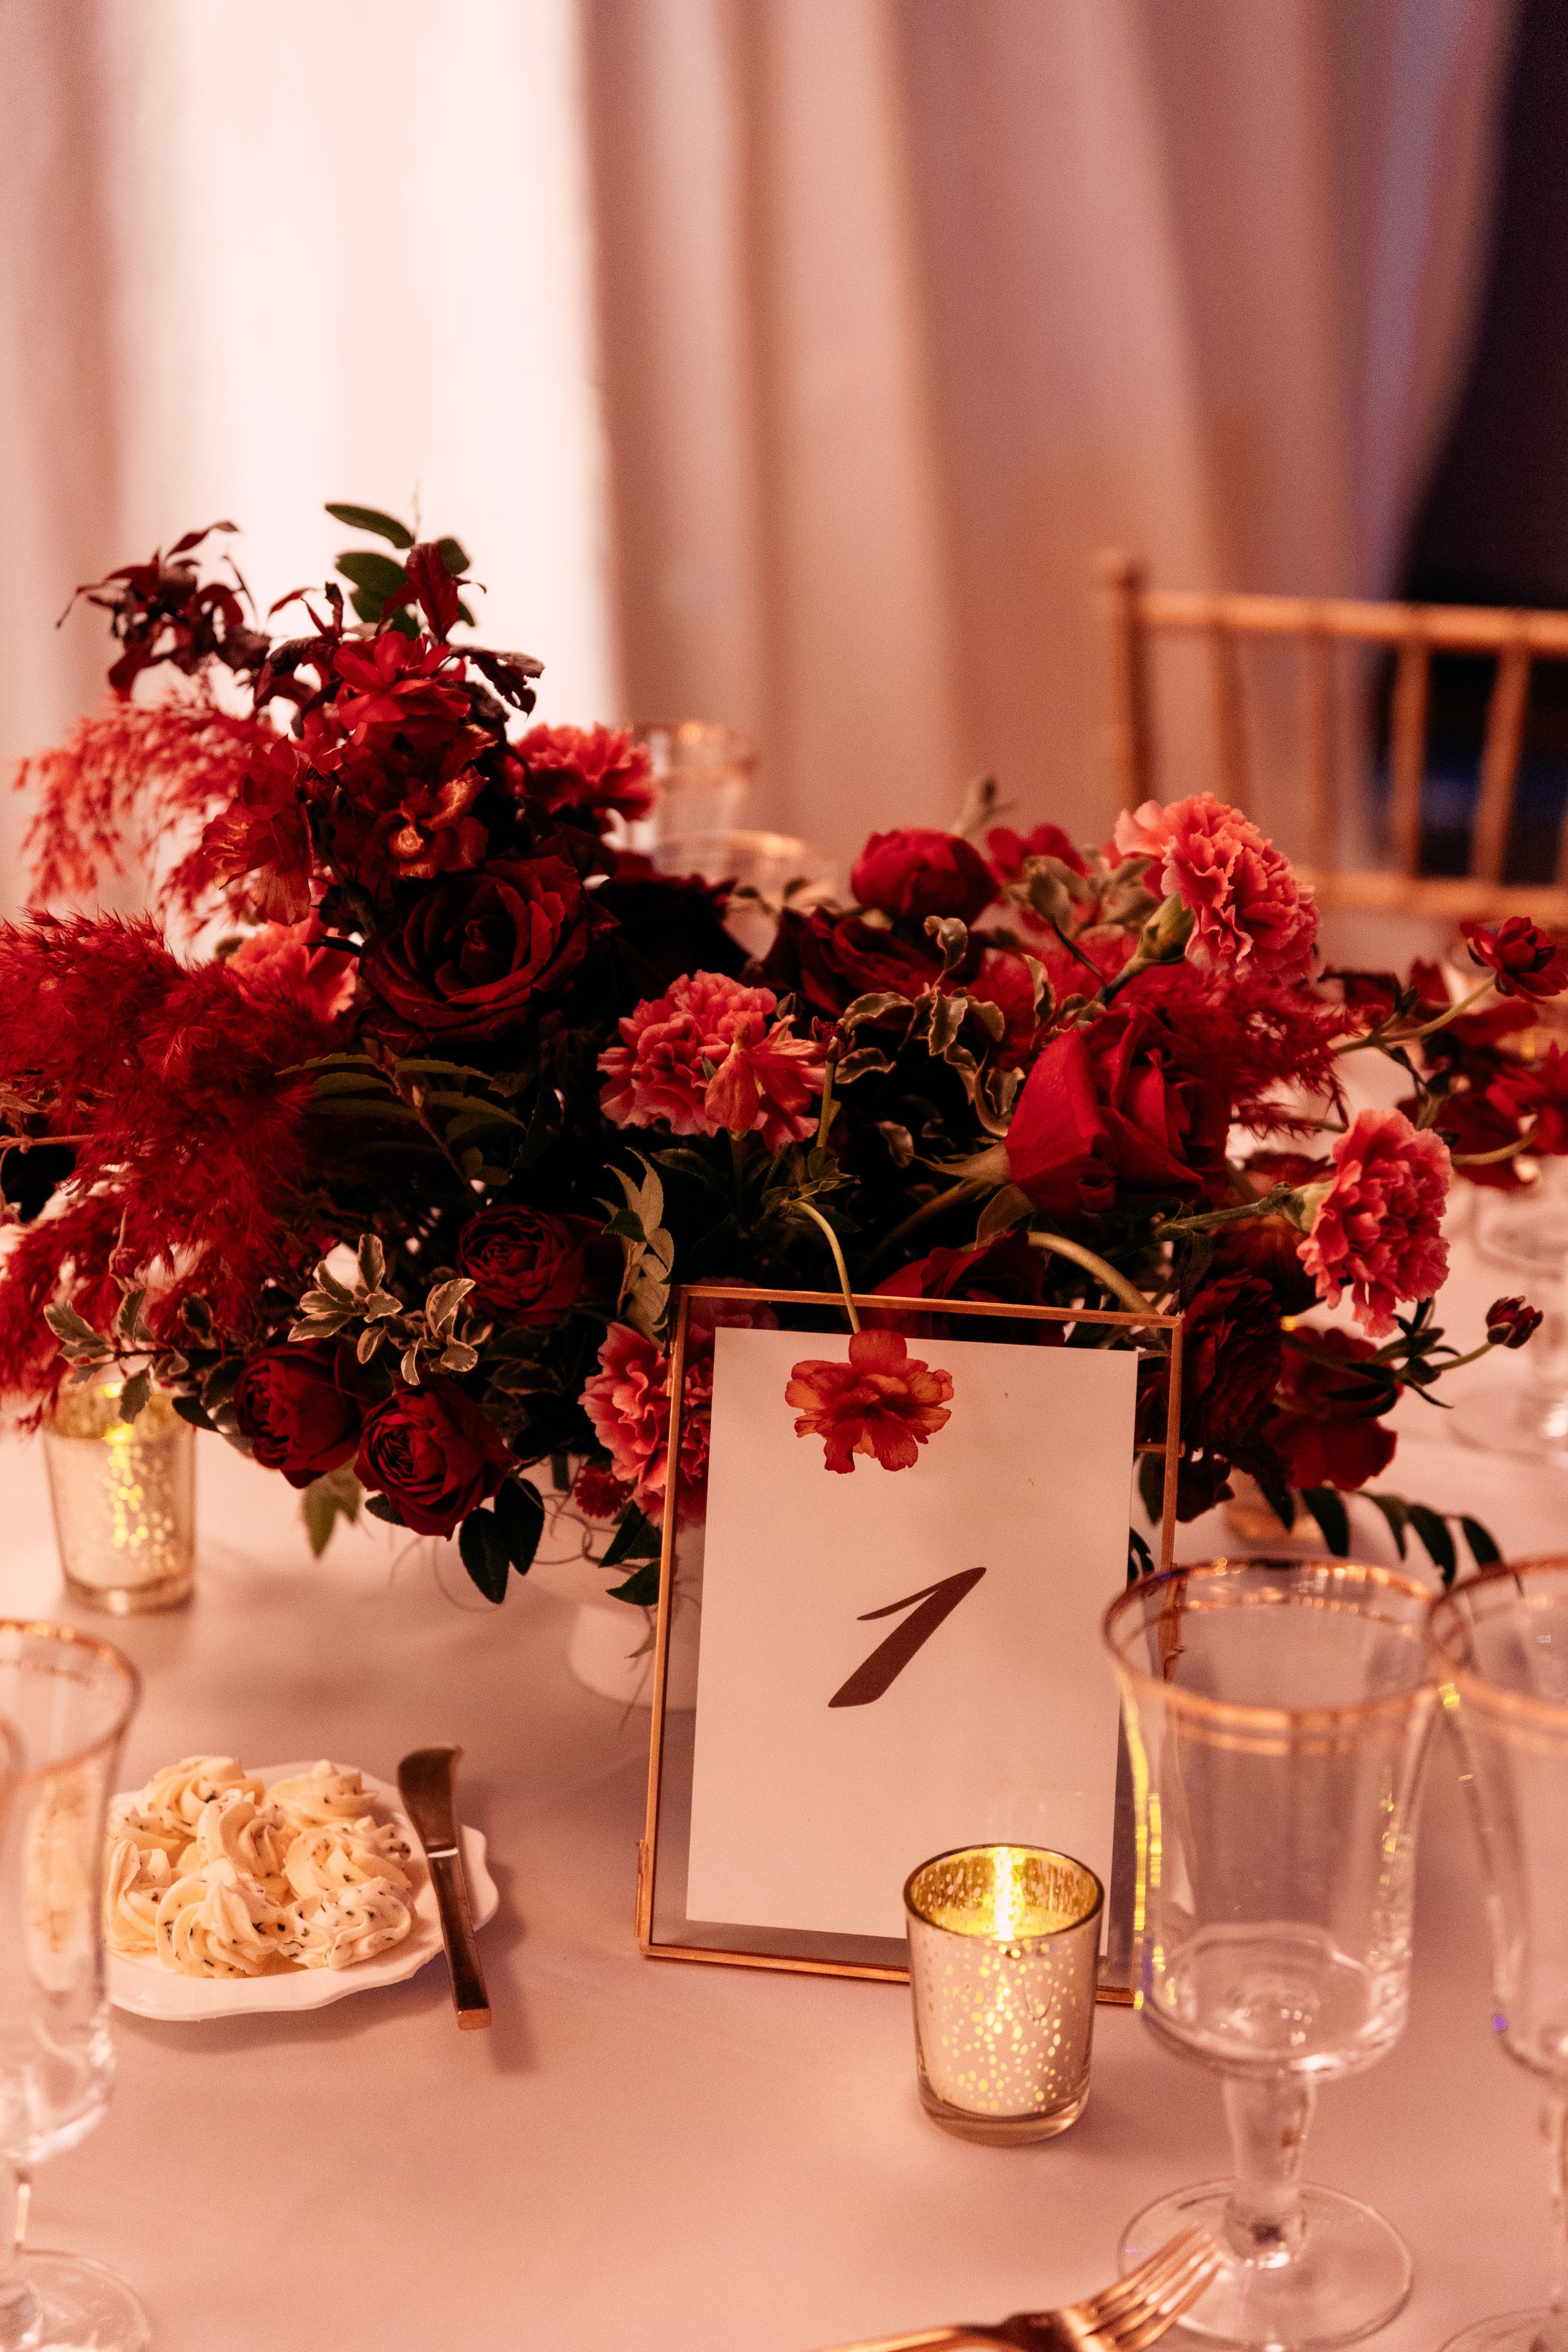 Modern and colorful centerpieces create a lively space for the TPAC Gala in Nashville, TN. Color-blocked floral hues of pink, red, yellow, blue comprised of roses, hydrangeas, tulips, ranunculus, pampas grass, carnations, and sweet peas. Designed by